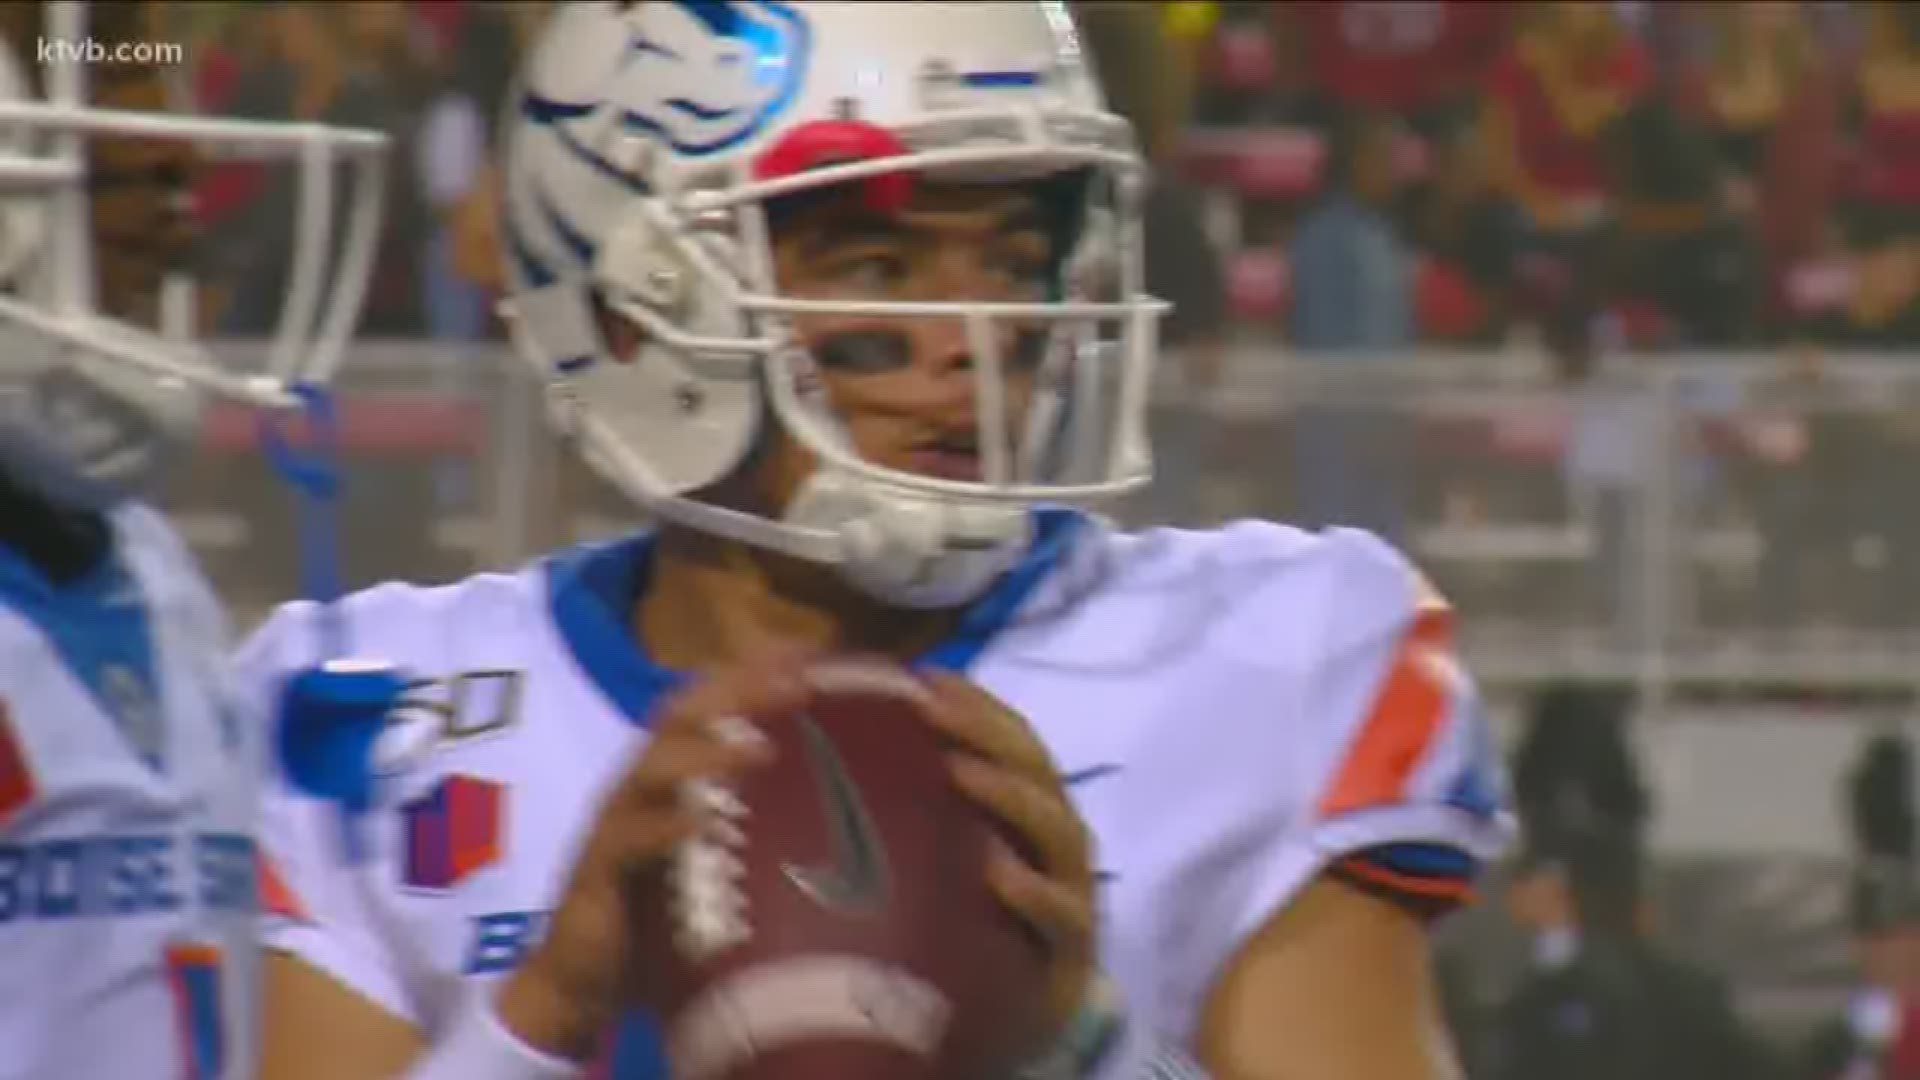 This won't be the first time that the Broncos start a backup at quarterback while on the road. See how Boise State fairs without their starter on the road.